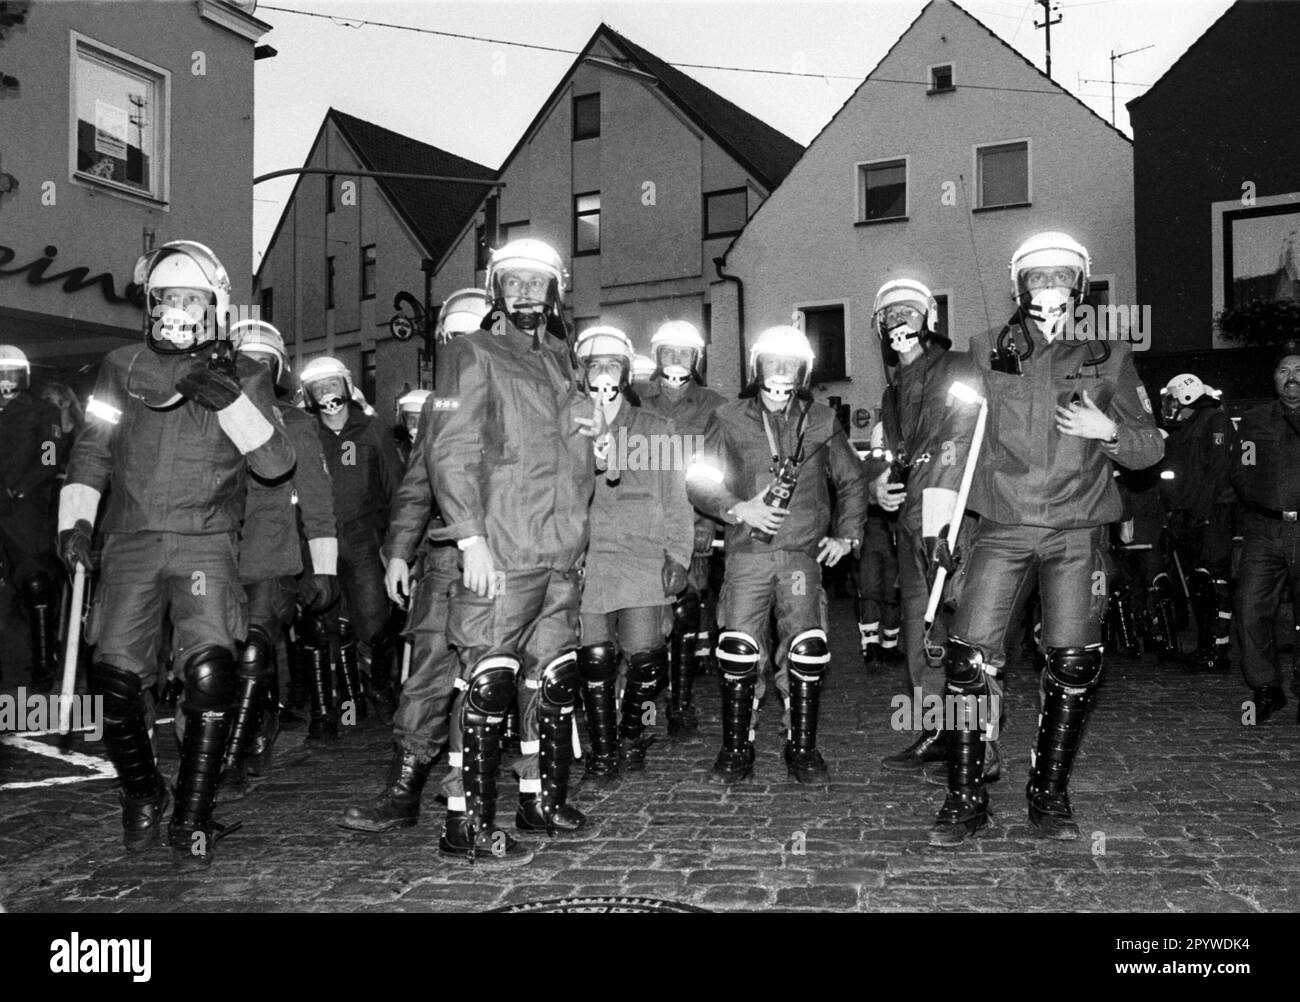 Demonstrations against the construction of the reprocessing plant (WAA) in Wackersdorf. In Munich, the riot police use massive baton to break up an unregistered rally by opponents of nuclear power. Wackersdorf, Bavaria, Germany, October 9th, 1987 Stock Photo